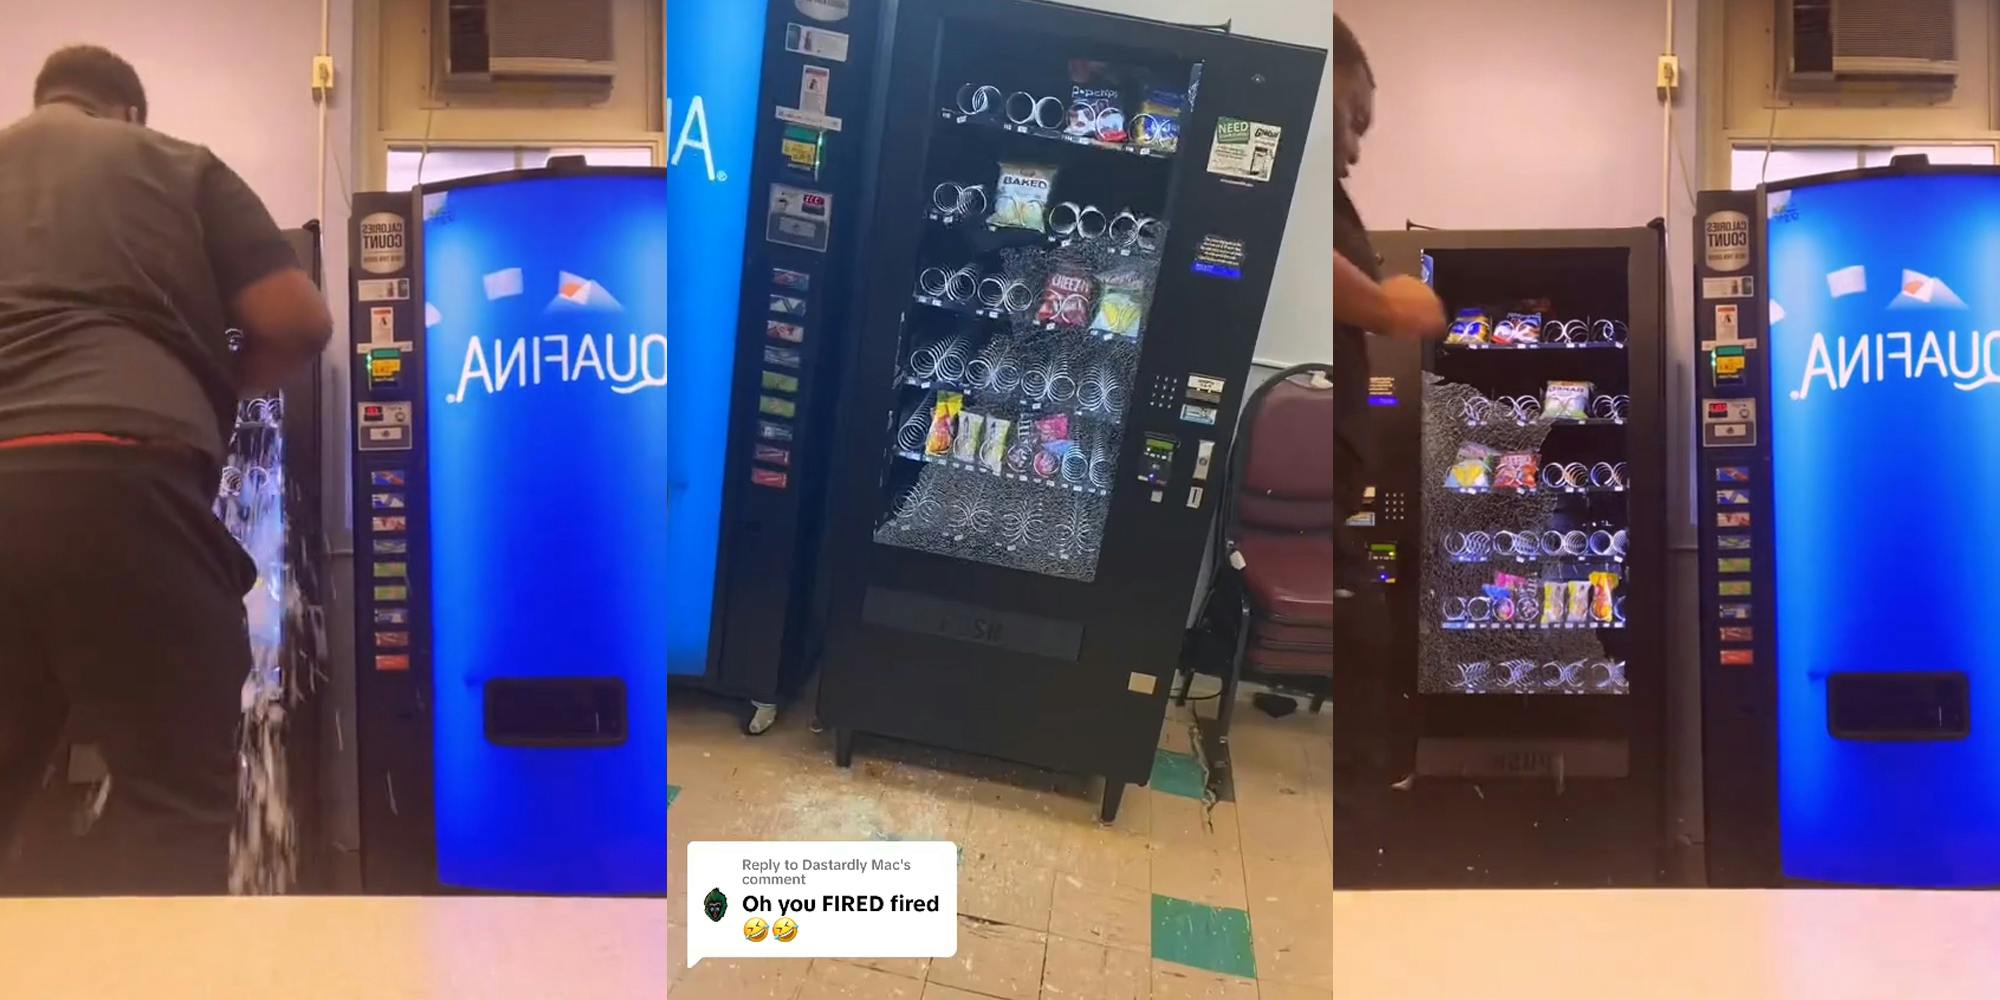 worker hitting vending machine breaking glass (l) vending machine with glass broken scattered on the floor with caption "Oh you FIRED fired" (c) worker stepping away from broken vending machine (r)